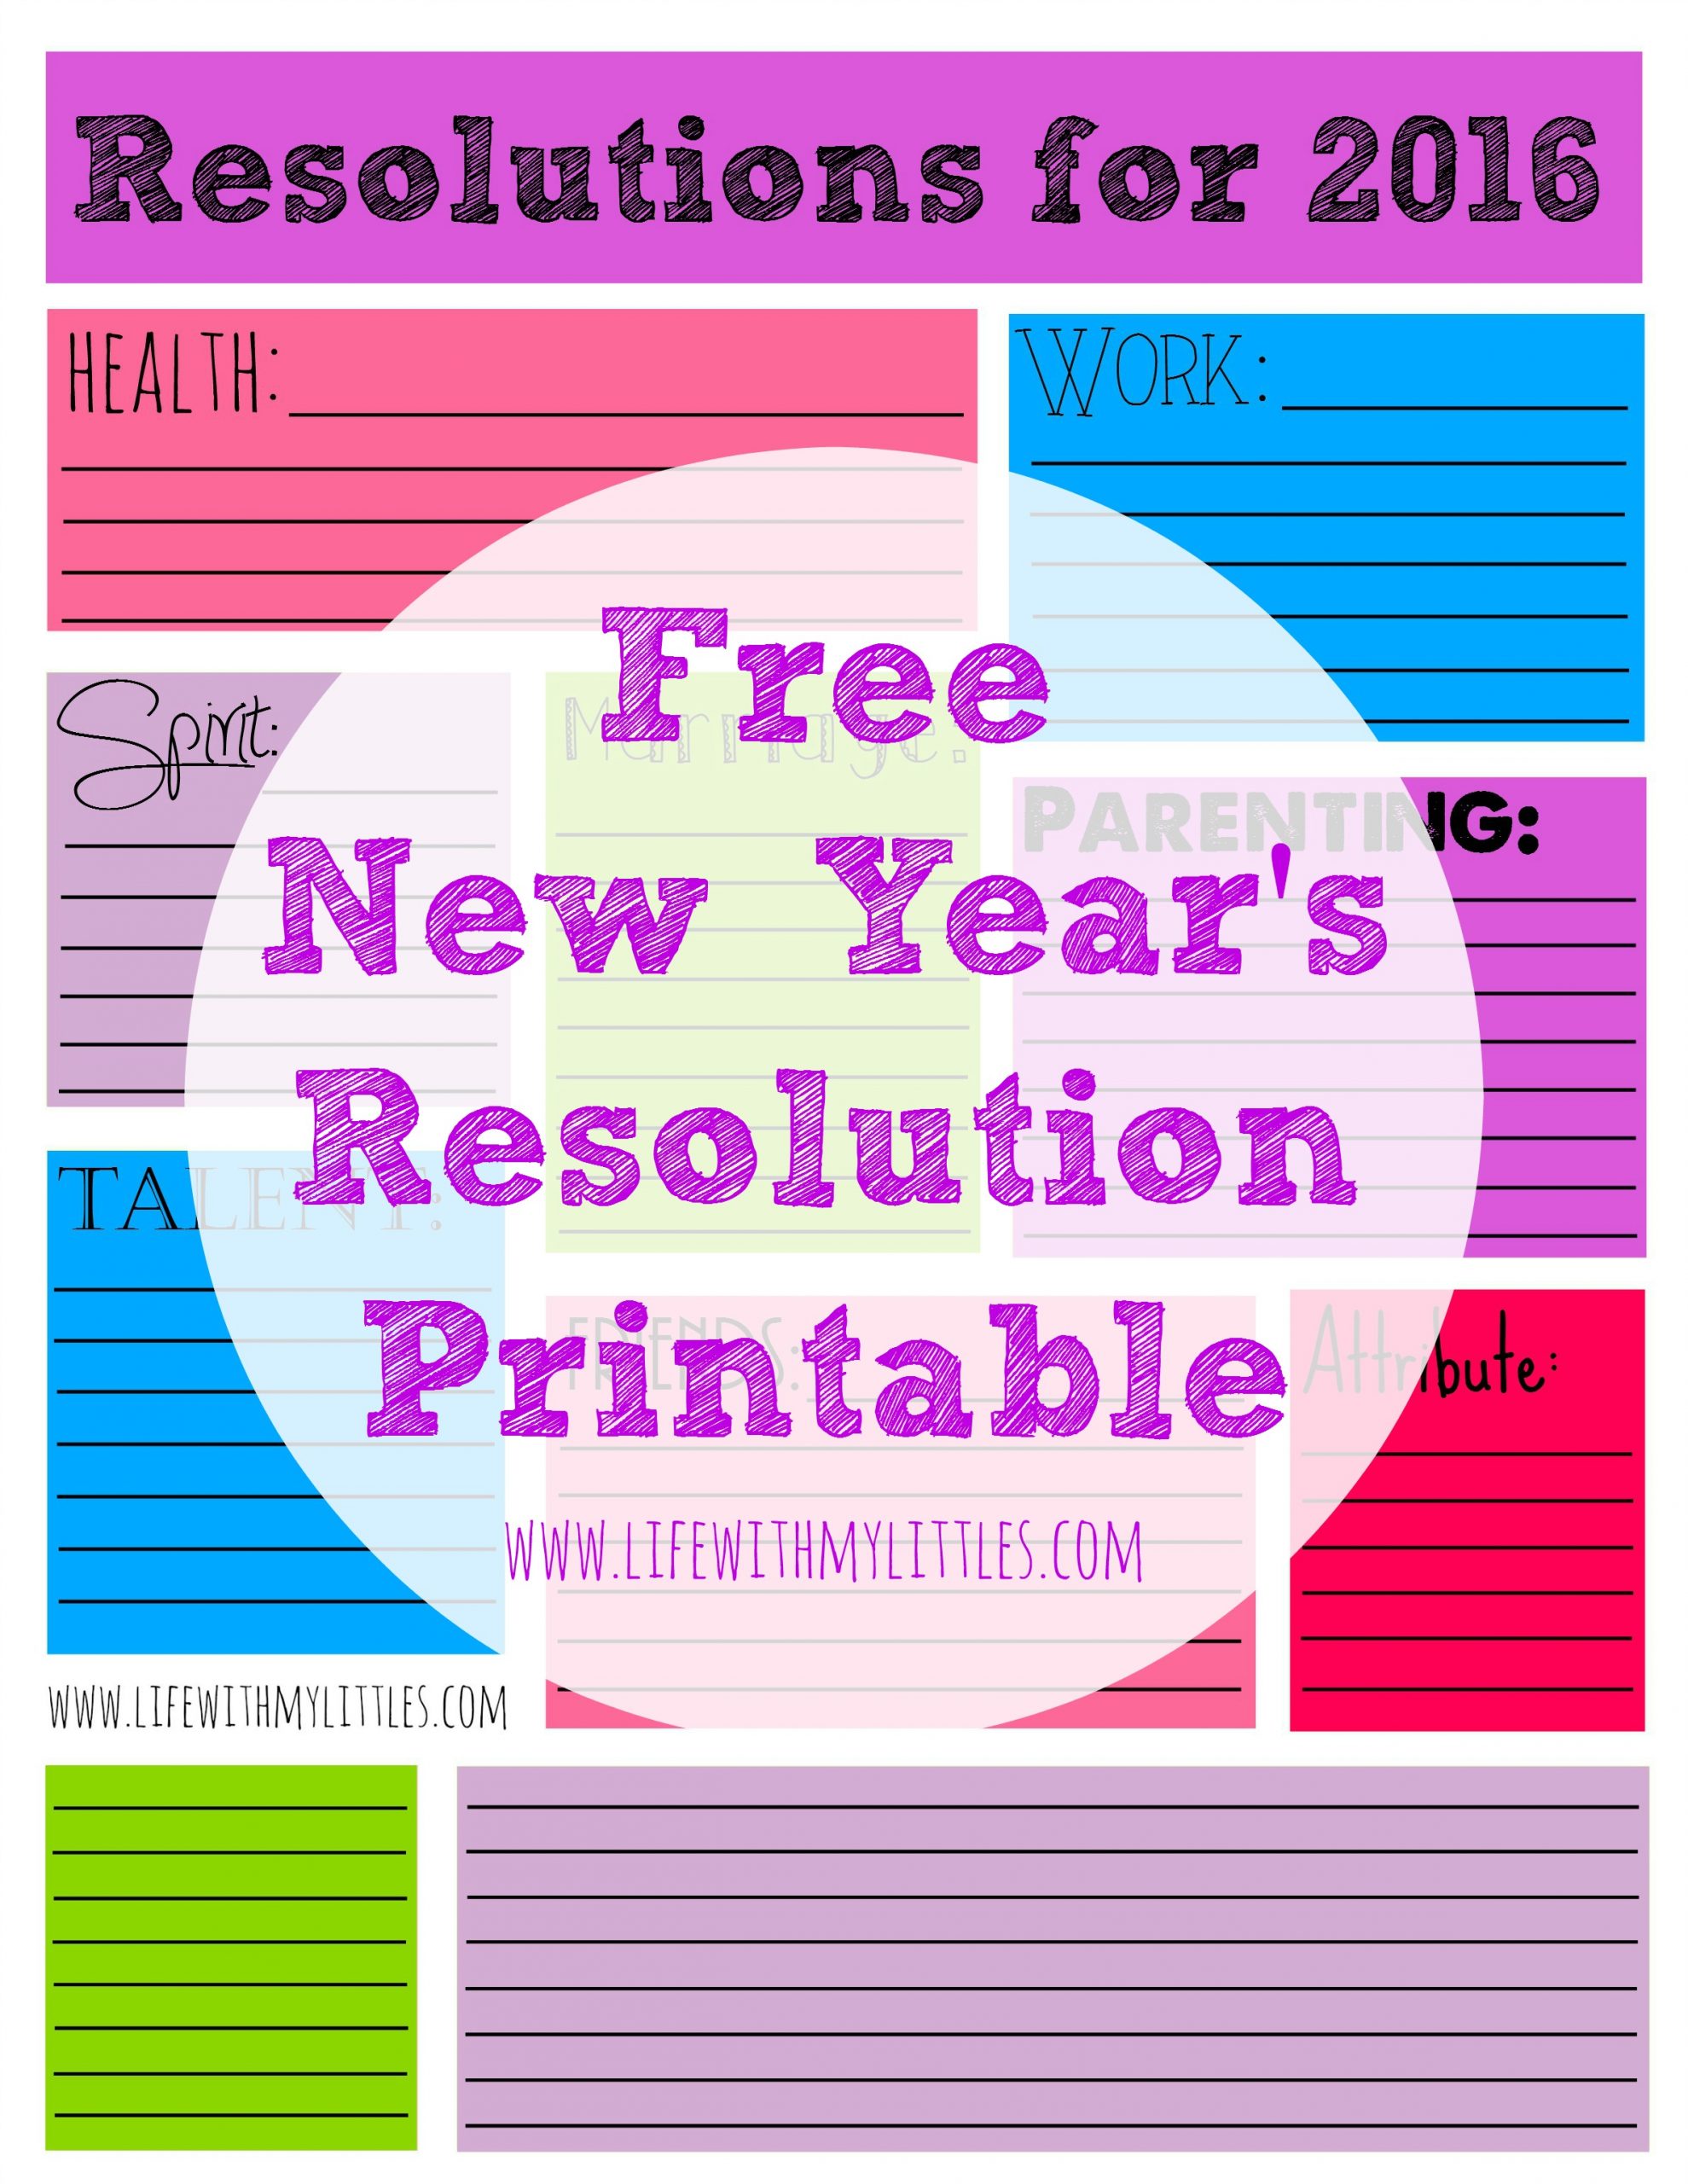 New Year's Resolution Printable for 2016